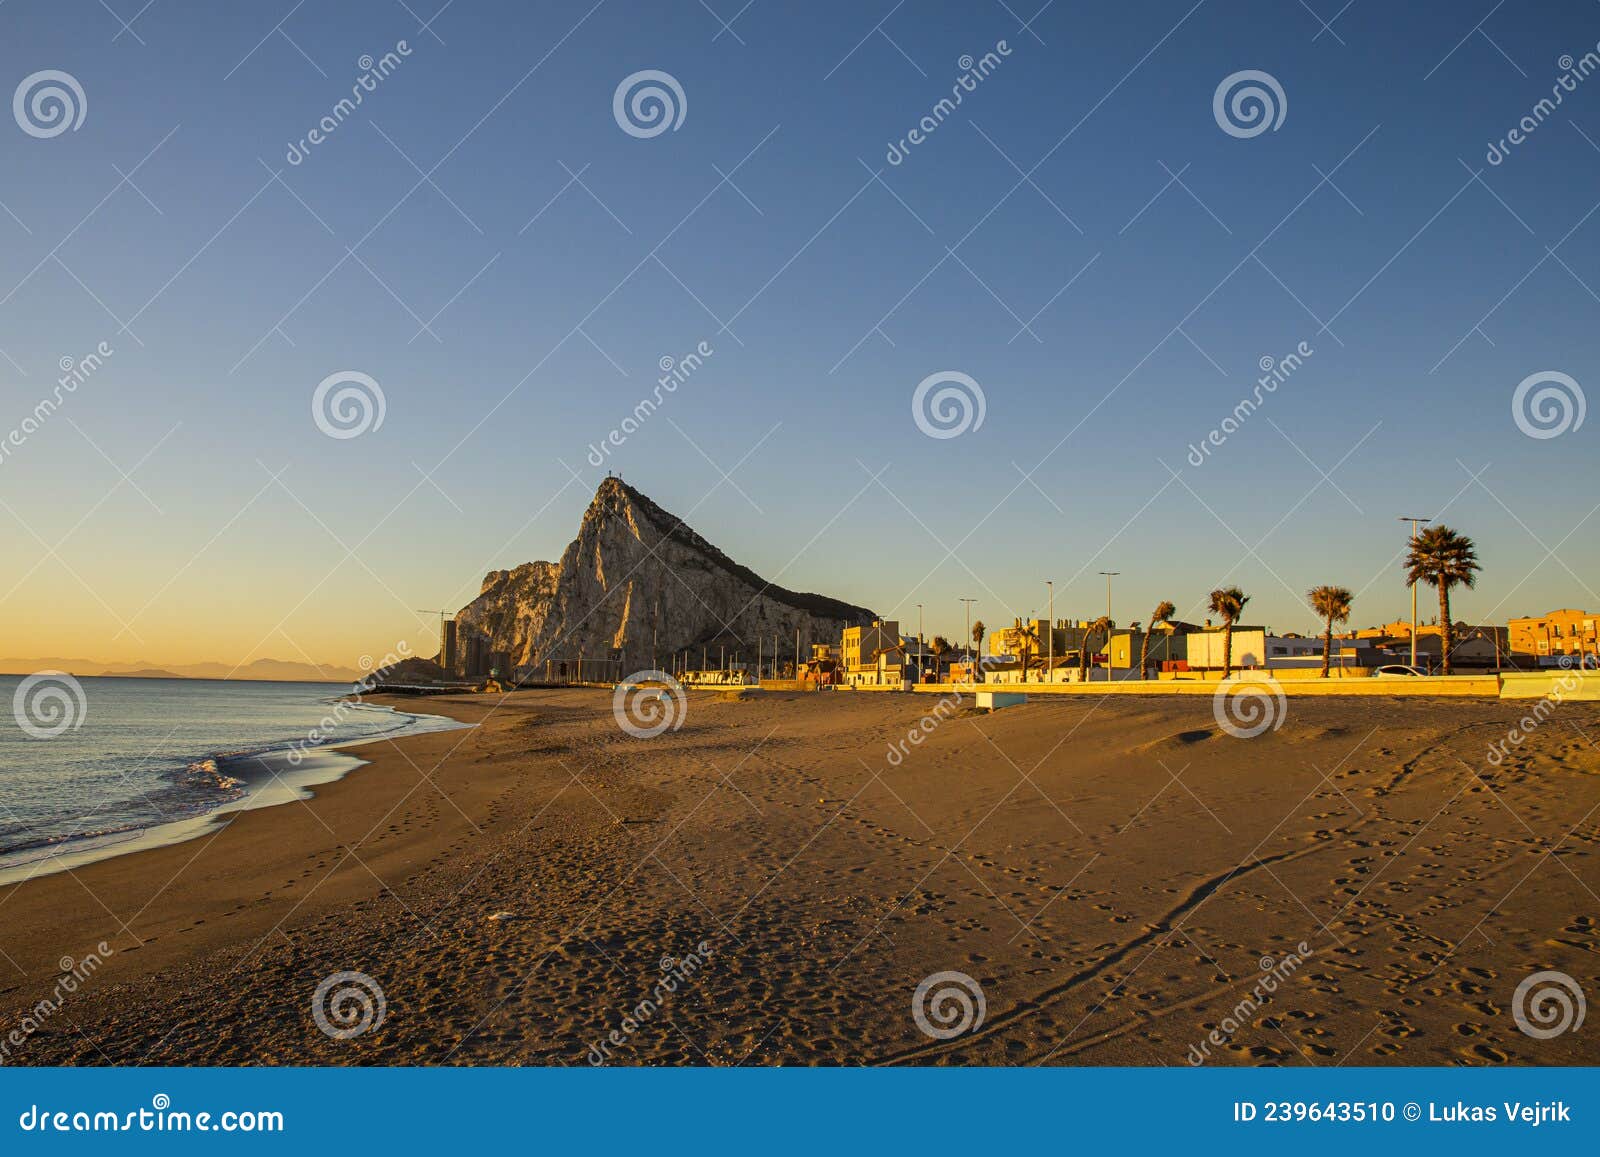 View To The Rock Of Gibraltar During Sunrise Stock Photo Image Of